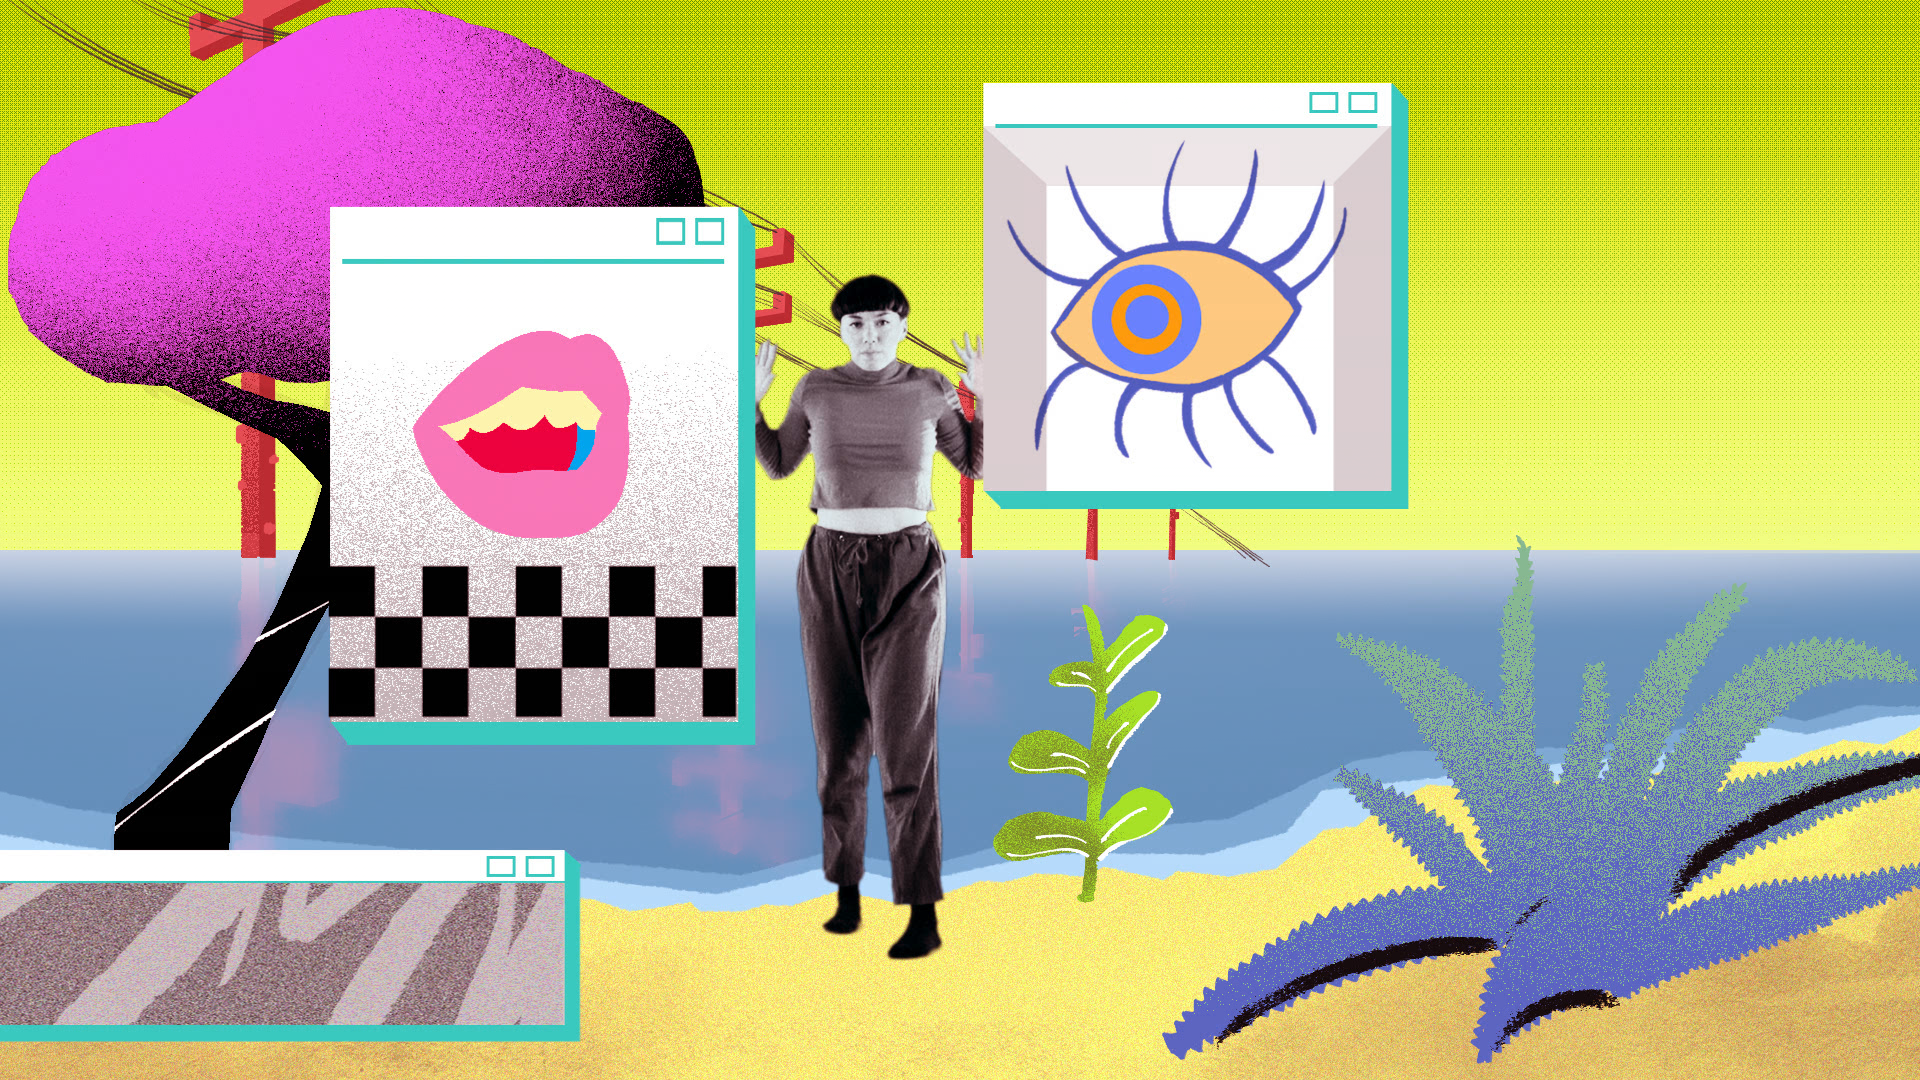 Still from an animation shows a woman in black and white standing in a brightly coloured environment including a puffy pink tree, lime green sky, yellow sandy beach and blue sea. Two floating white appliances have images on, one with pink lips and one with a yellow, blue and pink eye with long lashes.